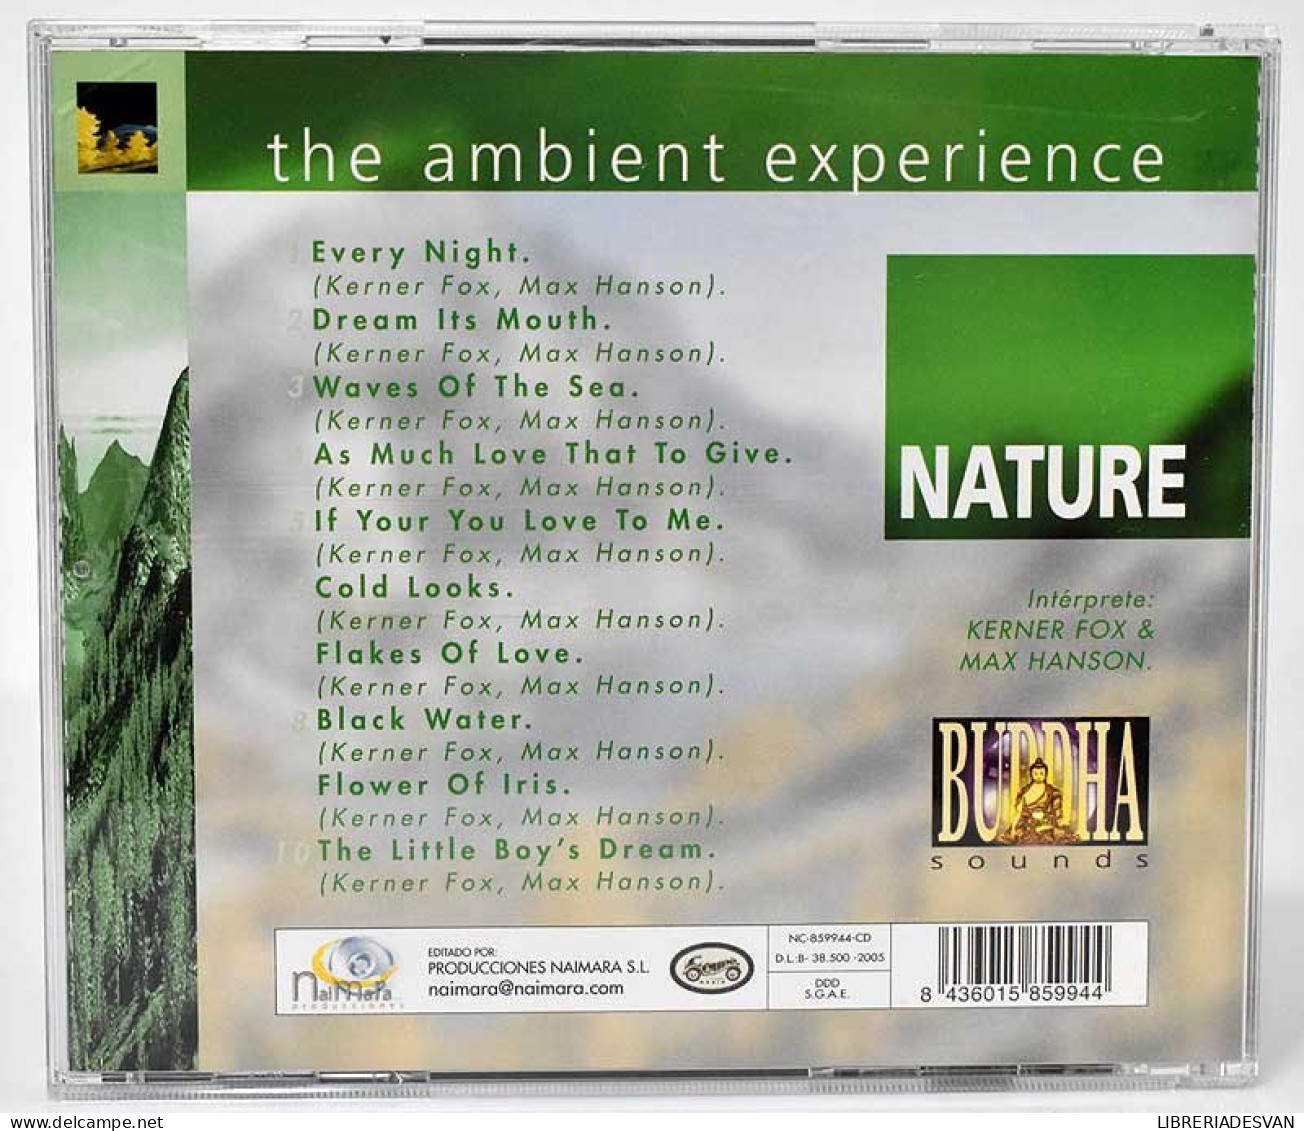 The Ambient Experience. Estuche con 4 CDs